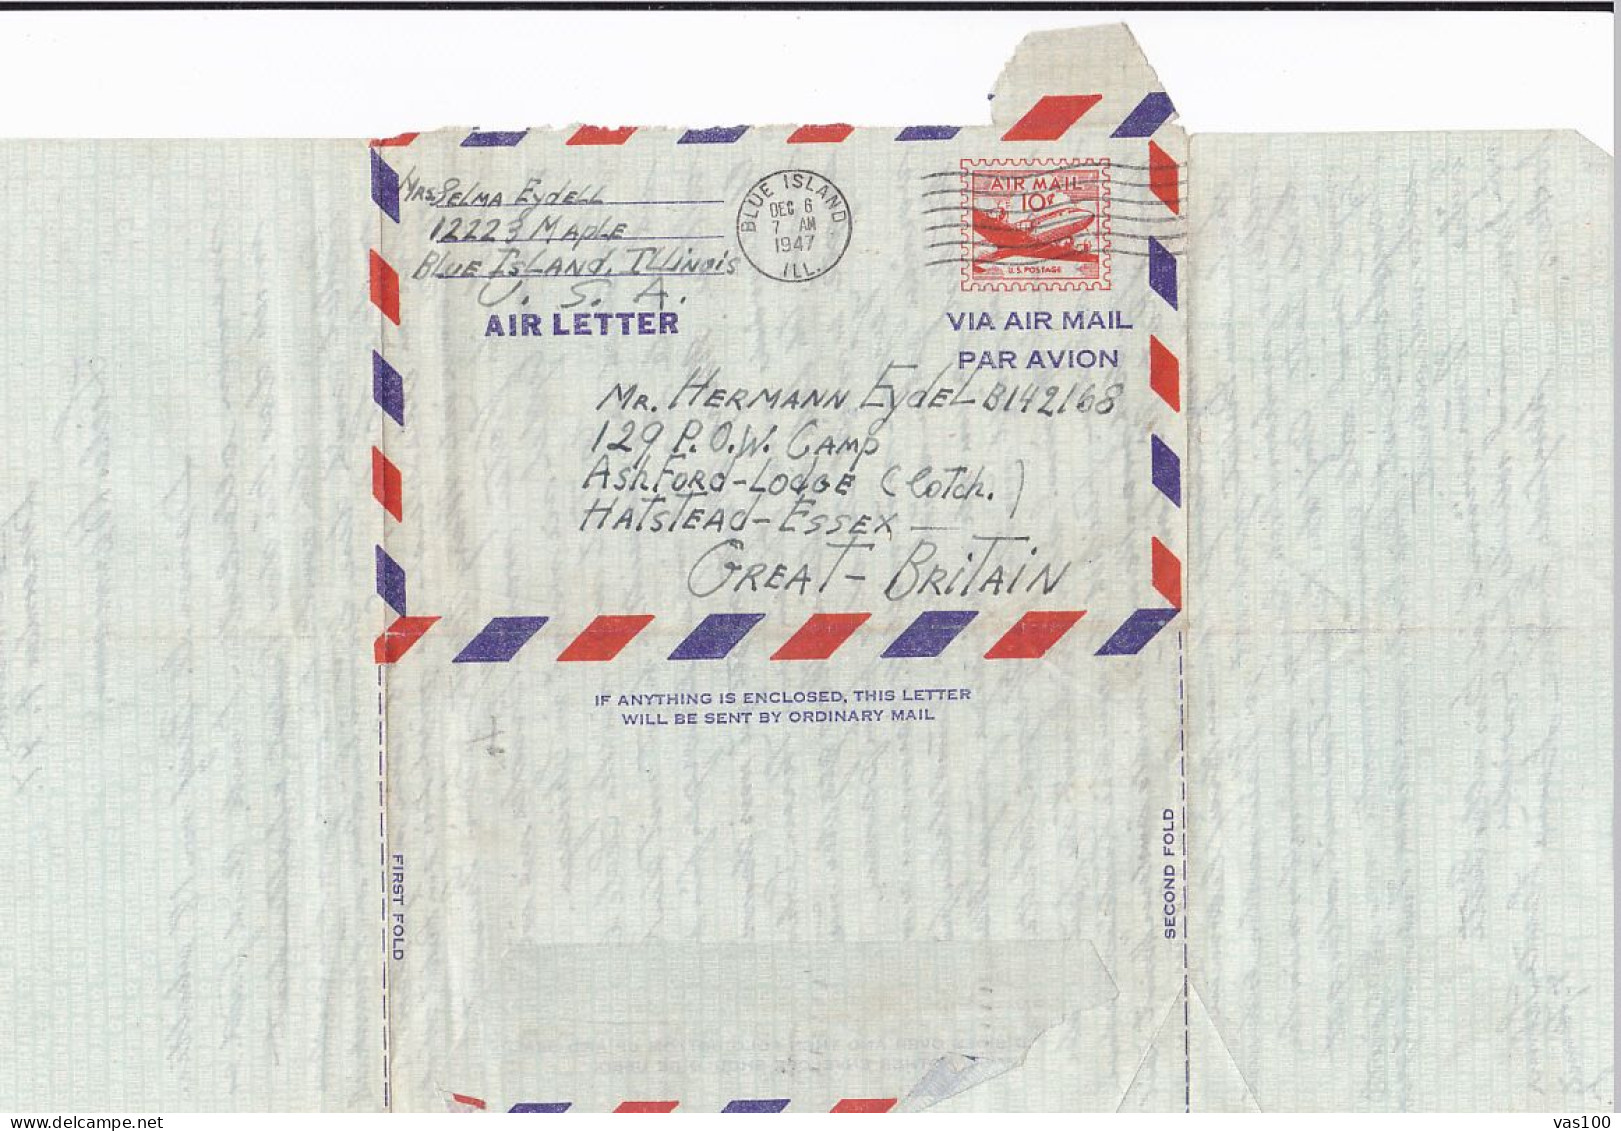 AIRMAIL, PLANE, AIR LETTER, 1947, USA - 2a. 1941-1960 Used